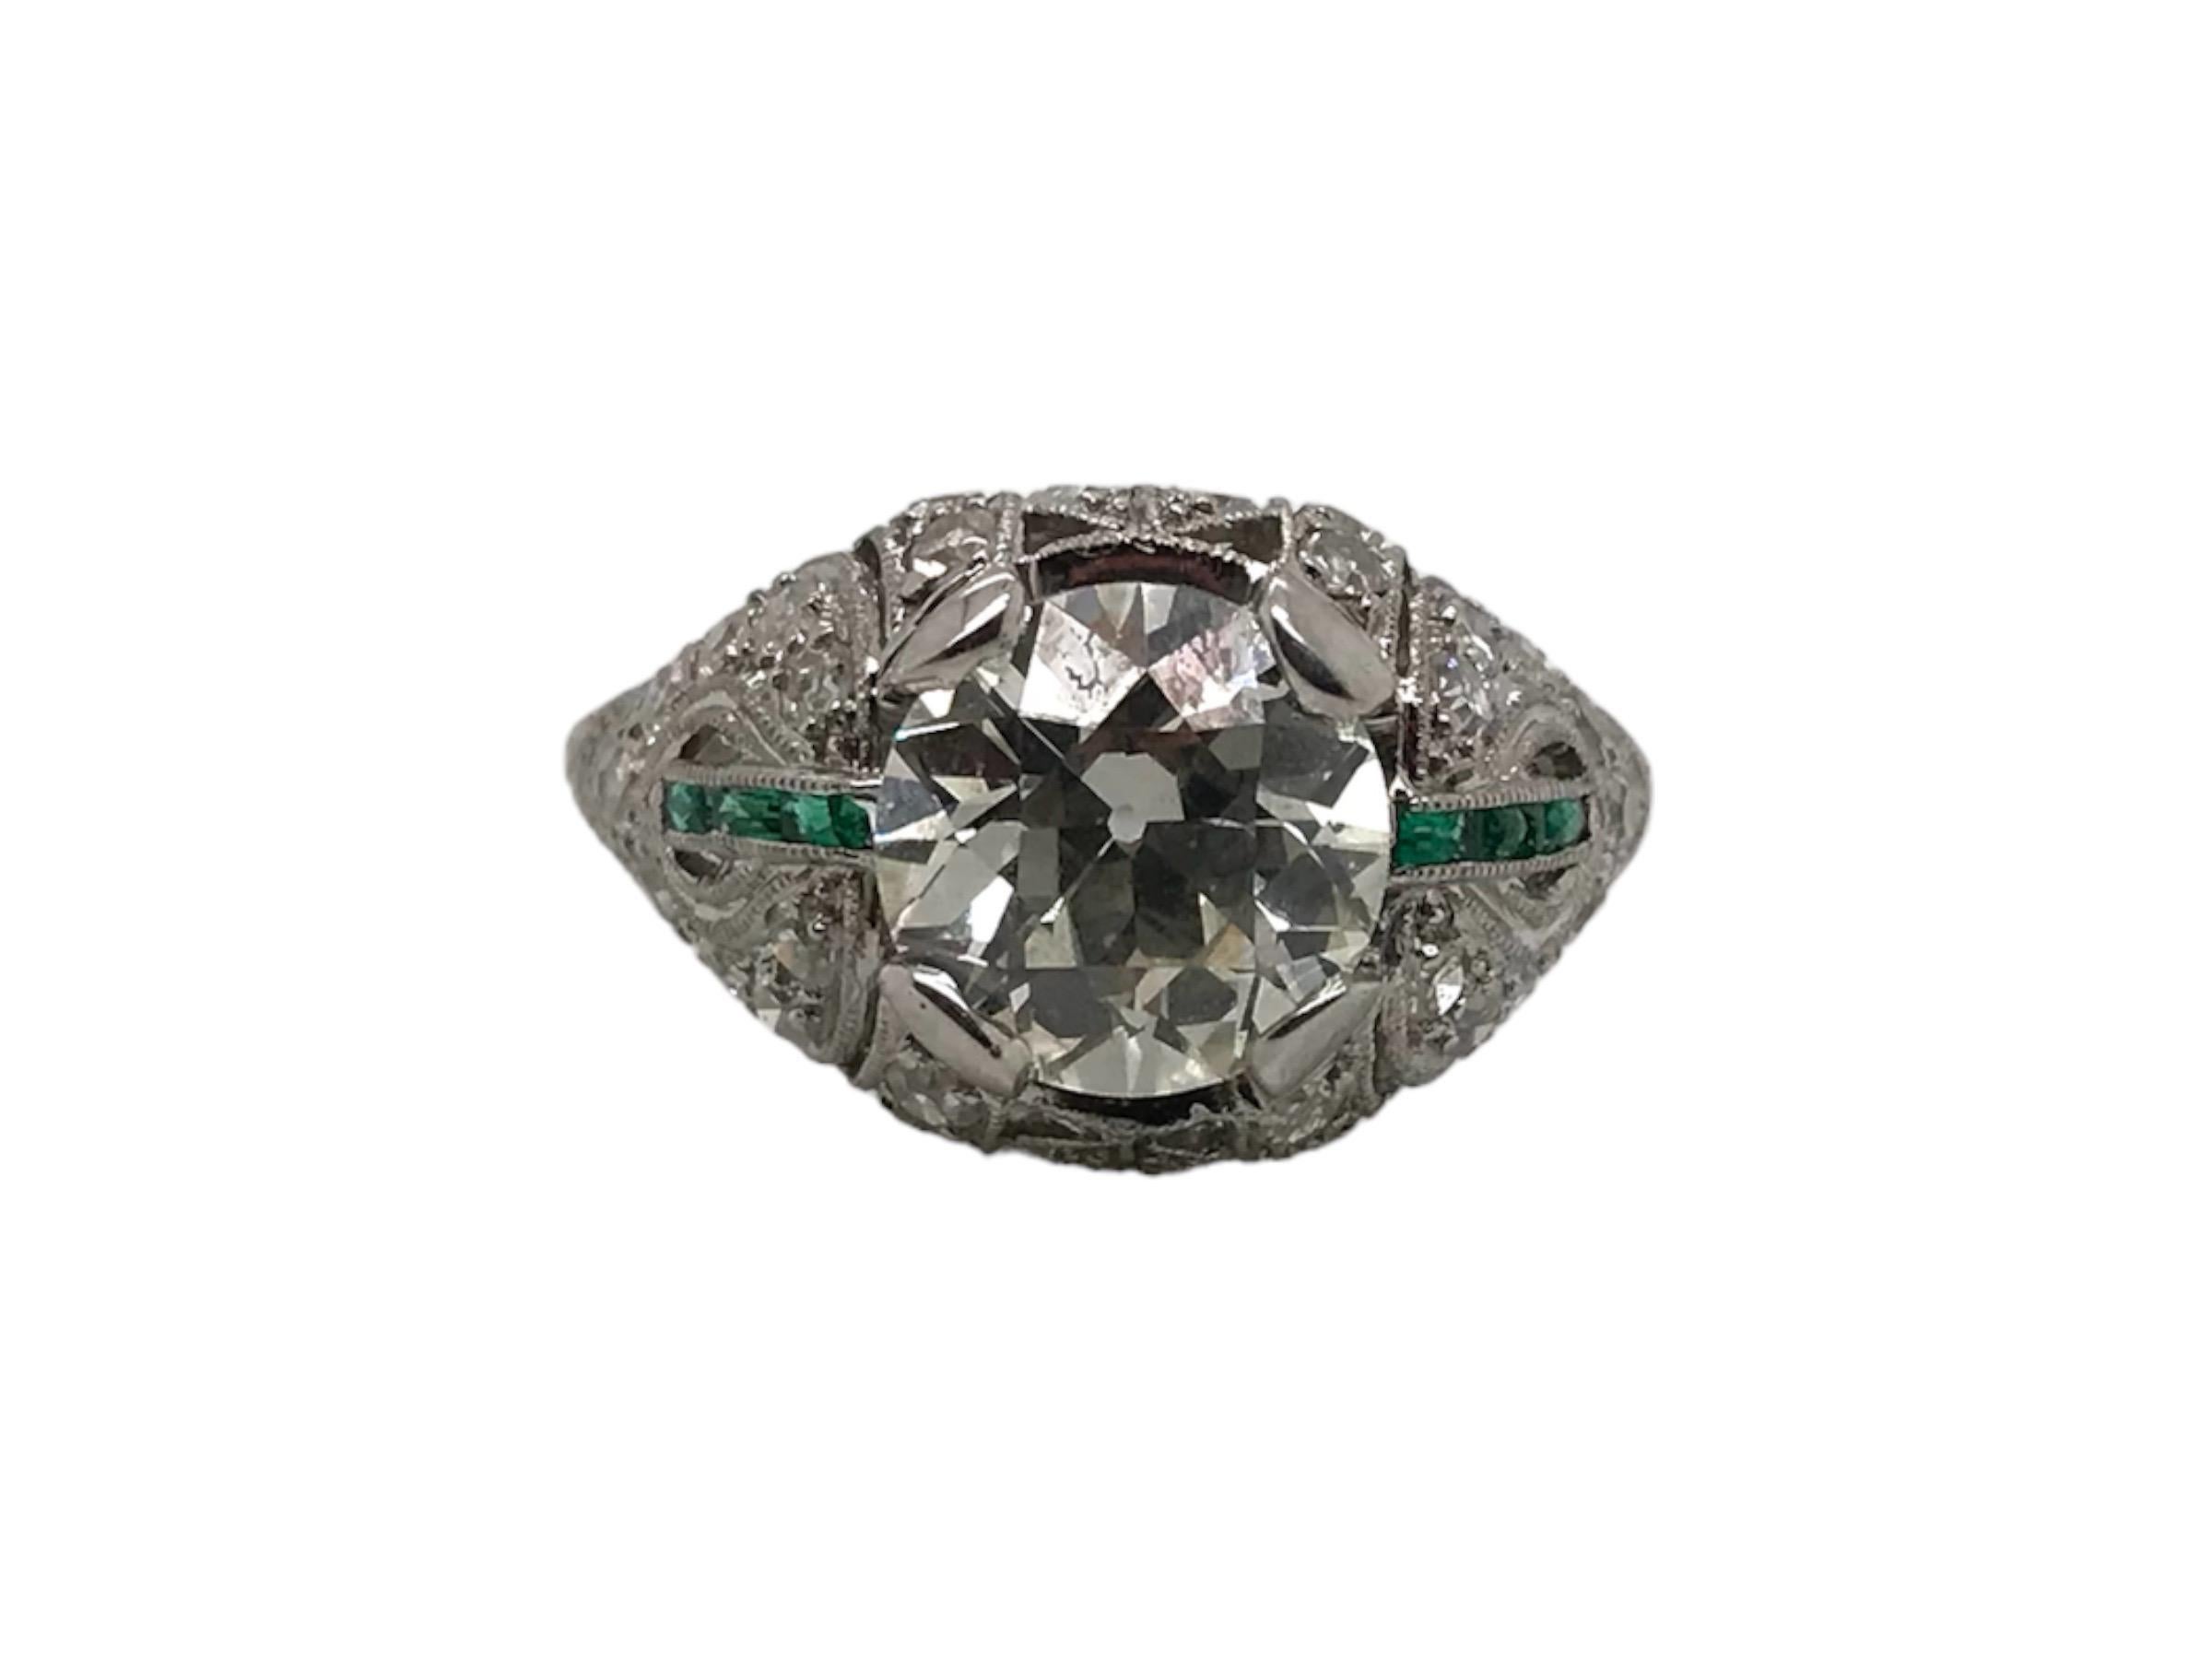 Some vintage pieces just stop your heart. This one definitely made ours skip a beat! 
This lovely Art Deco Era, 1920 - 1940, diamond ring features everything we love from the Era.
The center diamond is a stunning 2.38 Carat Old European Cut Diamond,